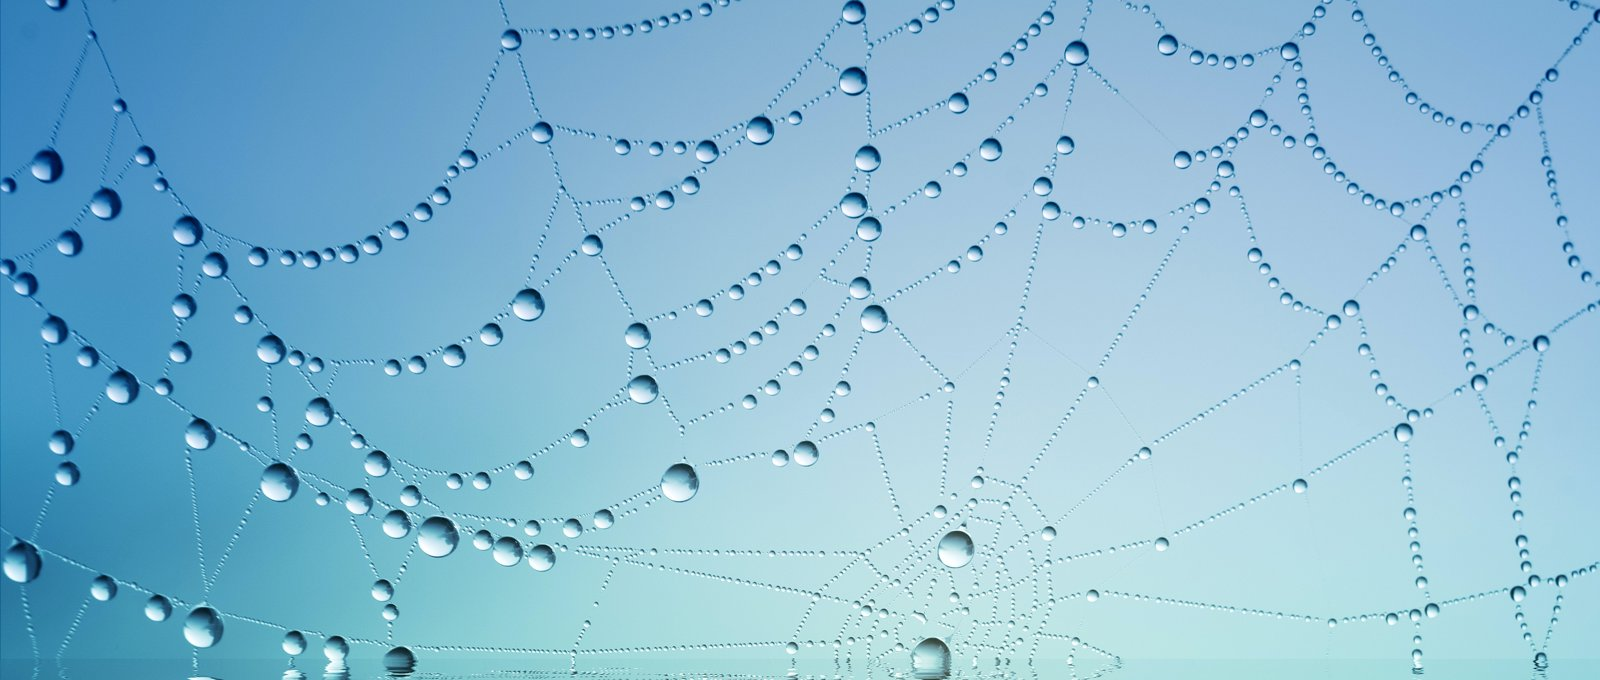 Photo of a cobweb with drops of dew on it